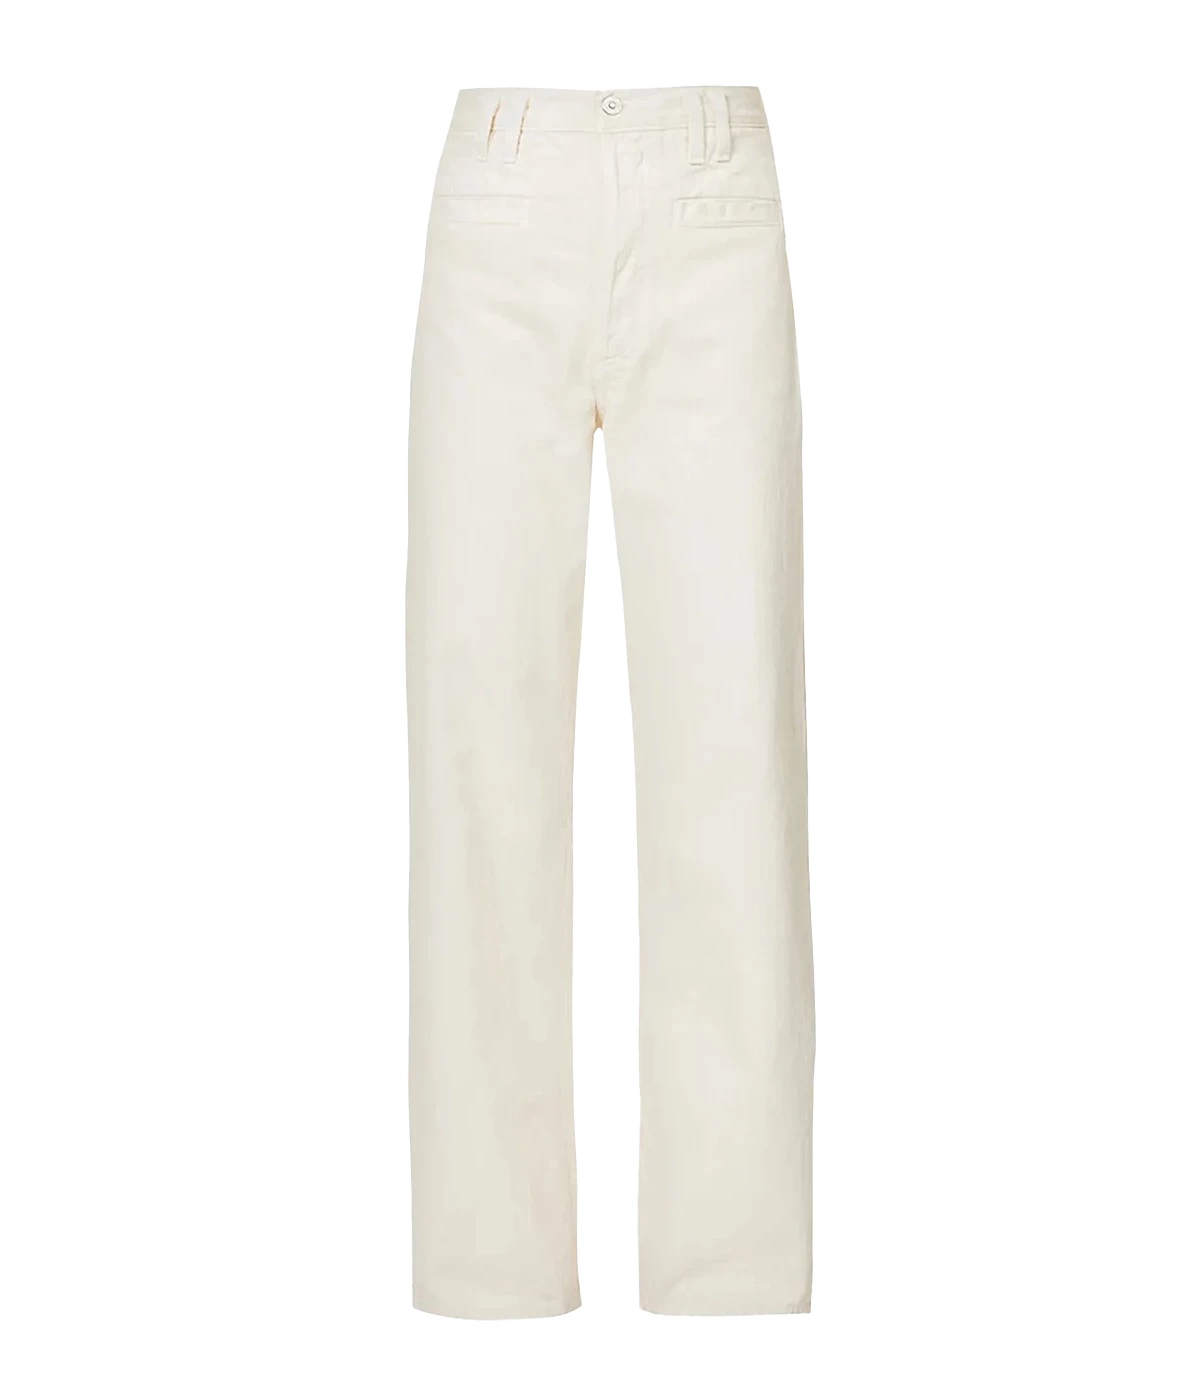 An off white wash elevated denim jean, with double  belt loop and front welt pocket detailing. Featuring a wide leg, clean hem, zip and button closure and 5 pockets. Elevated Jean, Everyday Jean, Vintage inspired jean, made in USA, comfortable, organic. 